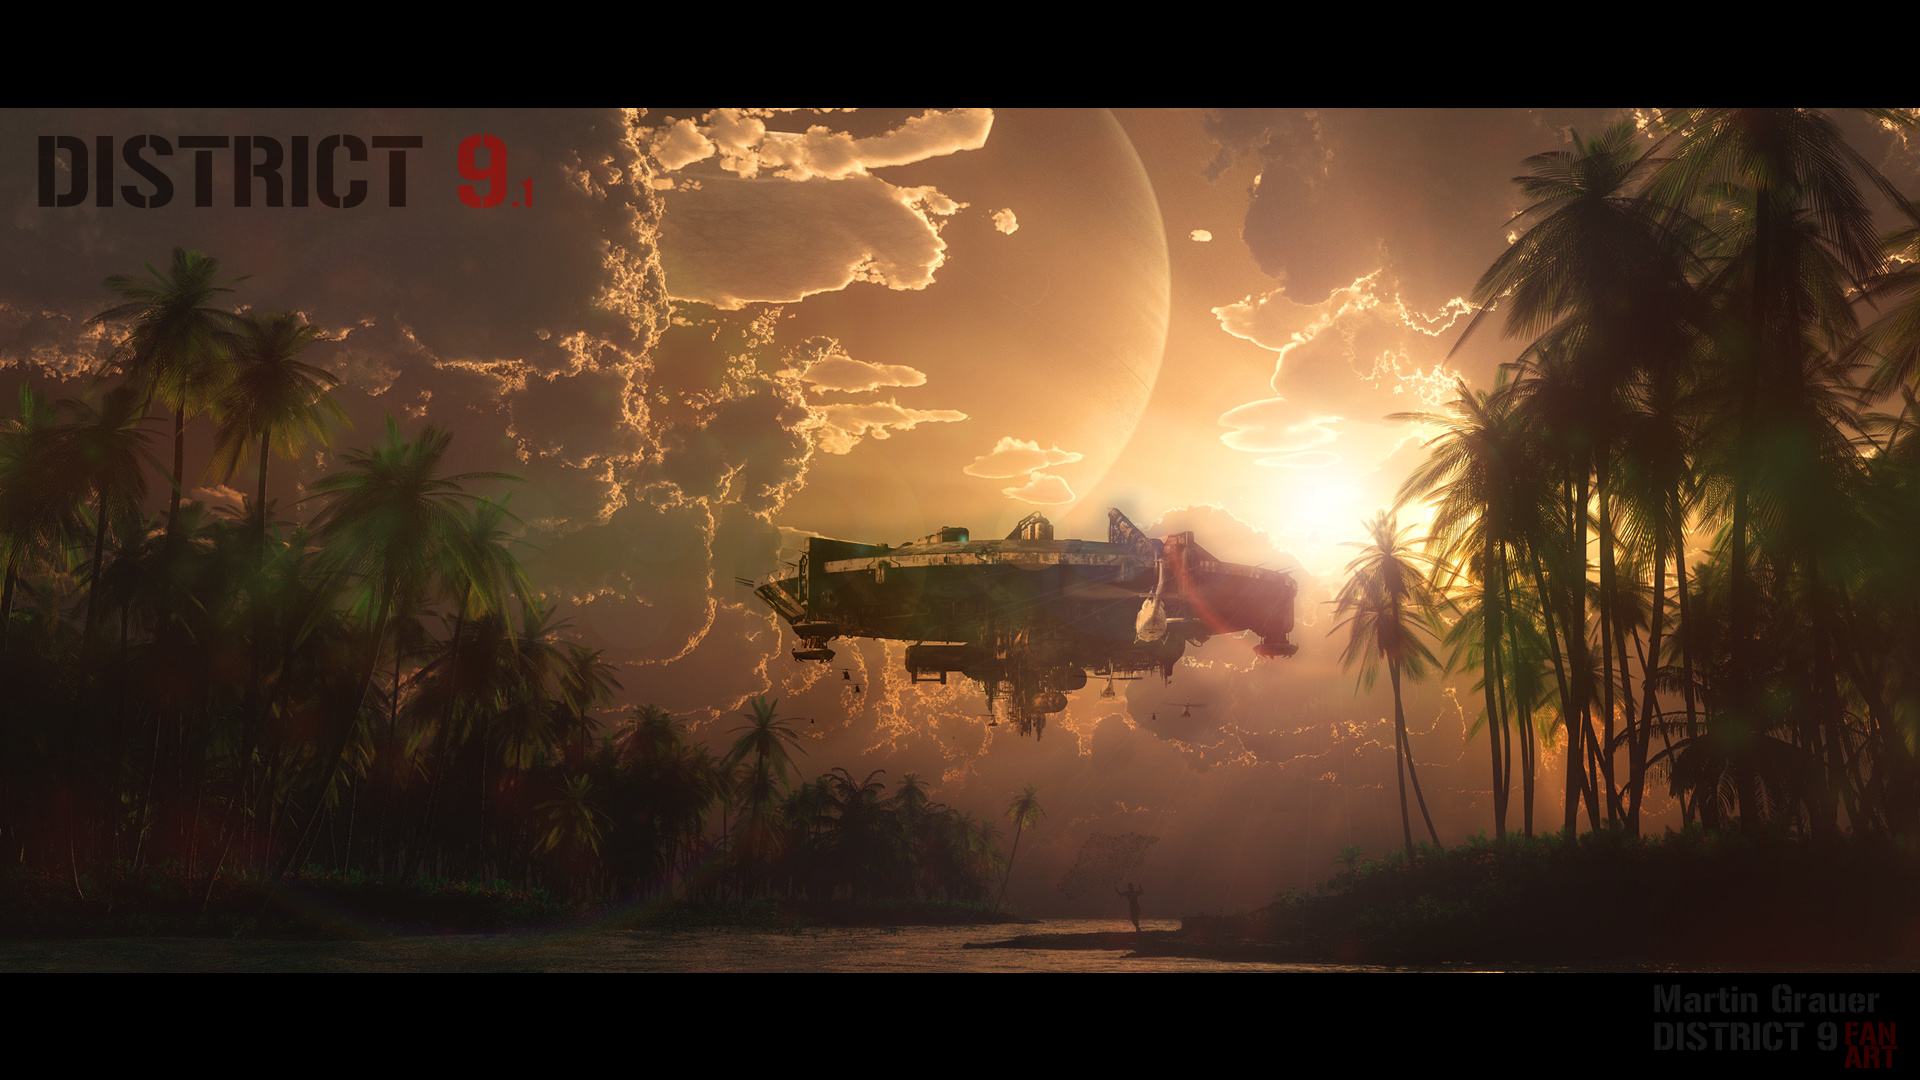 District Fan Wallpaper For Second Movie By Martingcz On